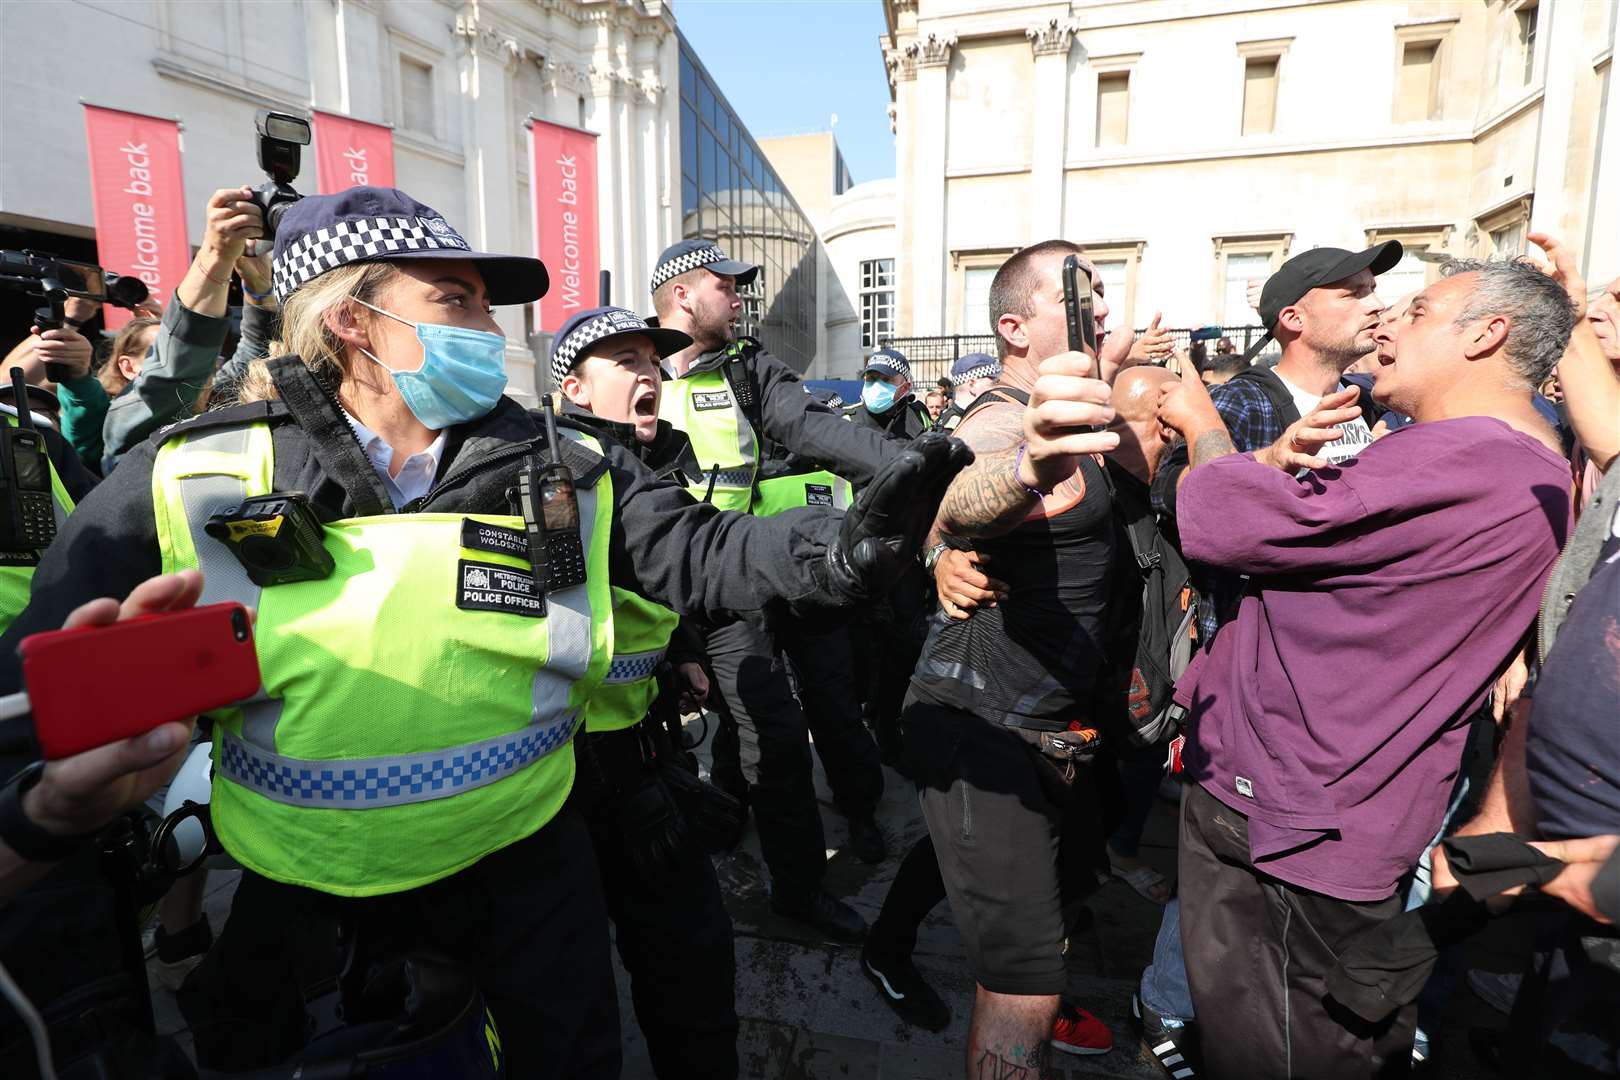 Police talk to demonstrators during an anti-vax protest (Yui Mok/PA)